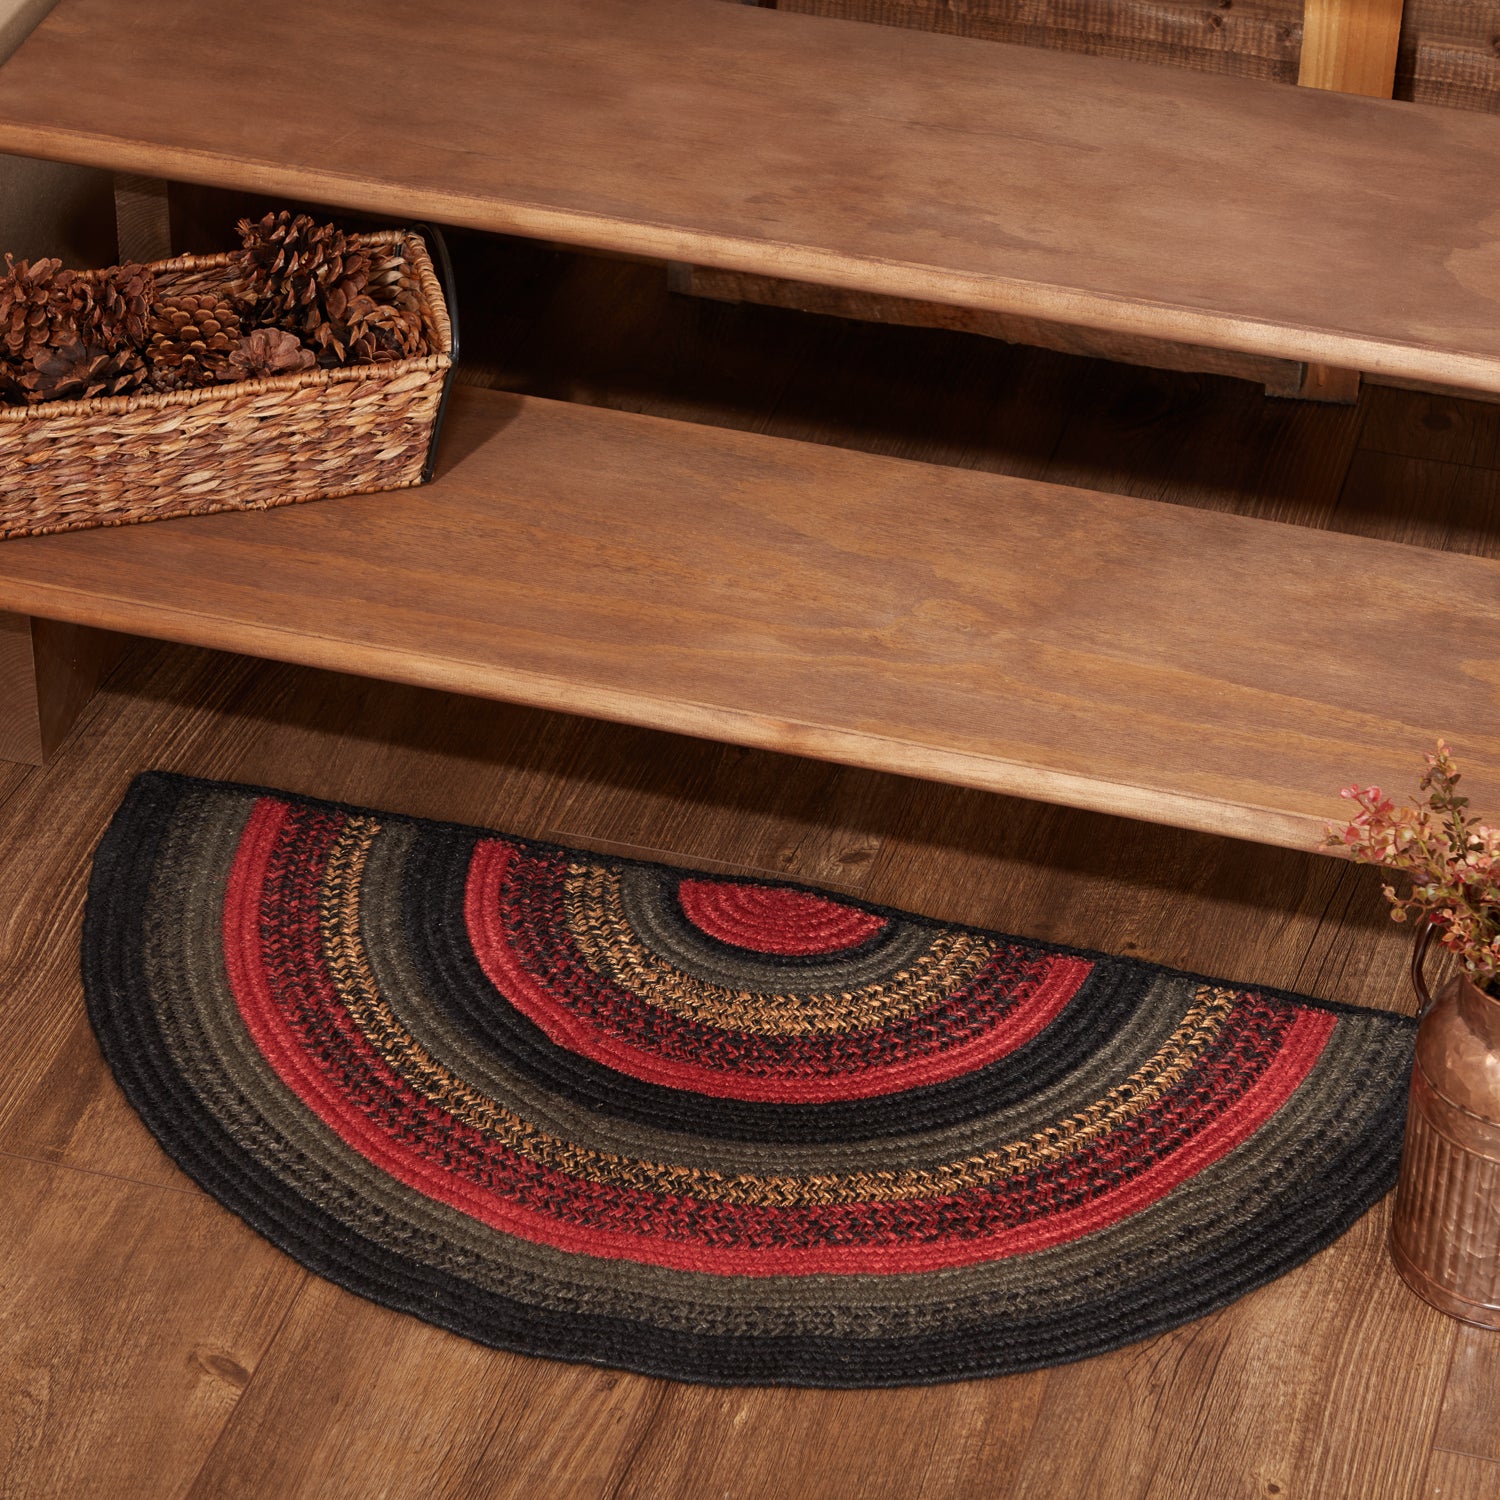 Rug Cumberland Jute Rustic Country No Slip Pad Striped Floor VHC Brand – VHC  Brands Home Decor